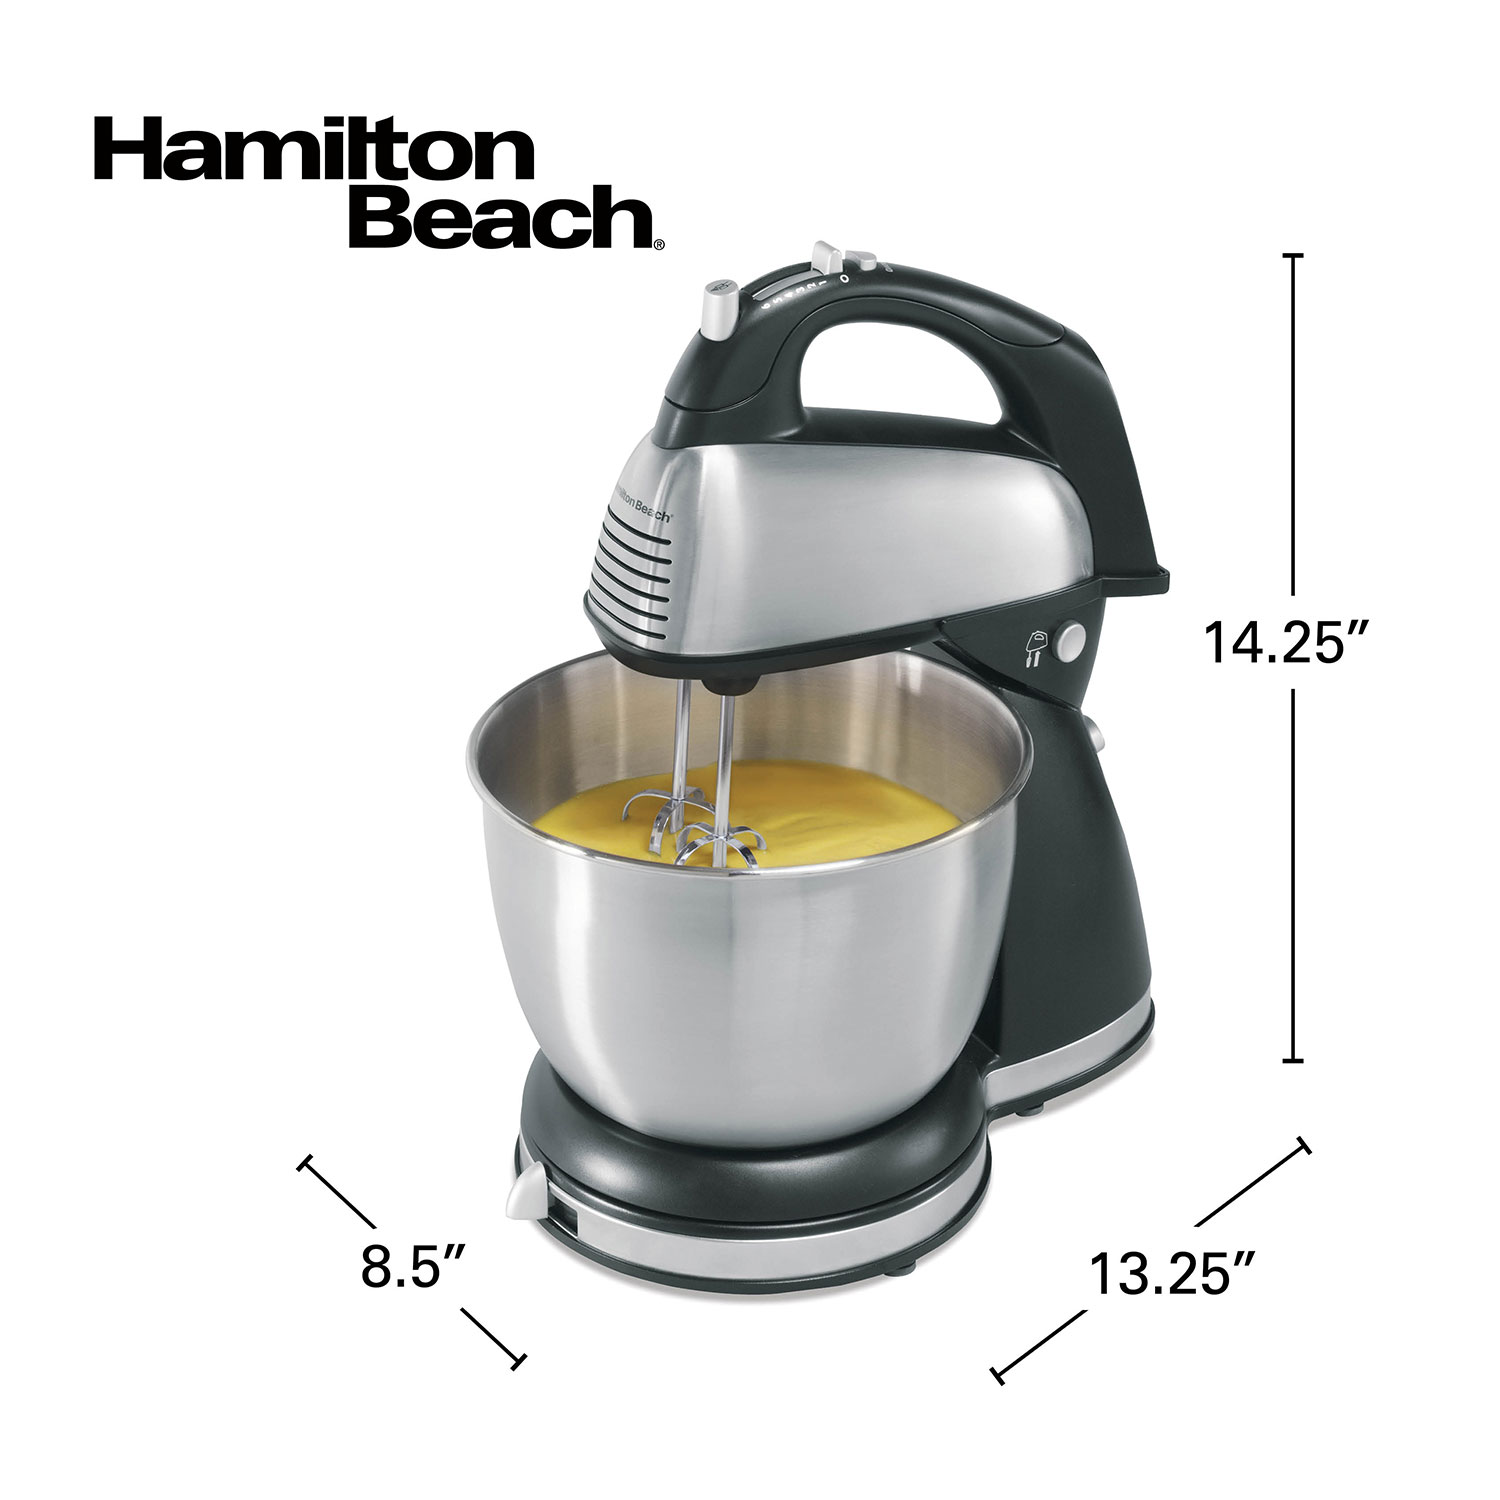 Vintage stand mixers from Kitchen-Aid, Hamilton Beach & more were